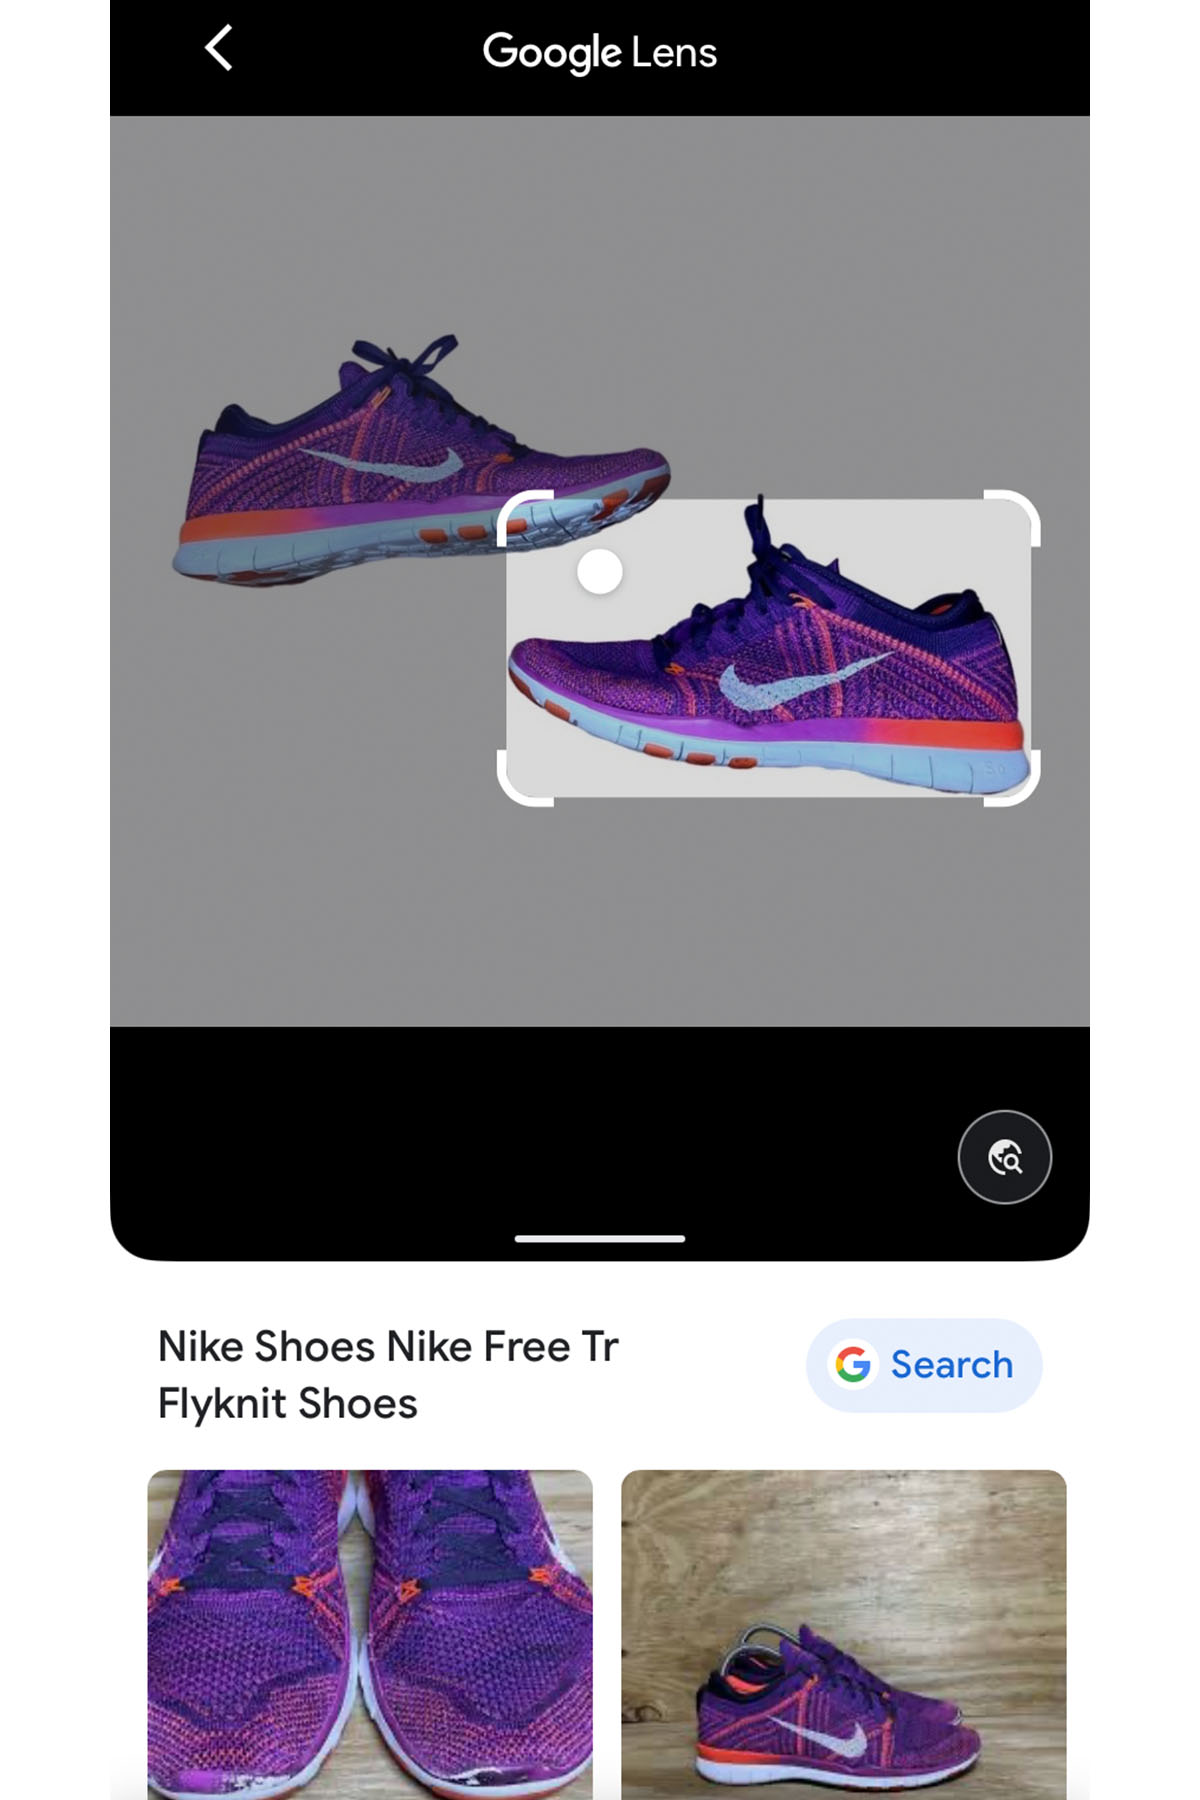 a pair of nike shoes on google reverse image search.